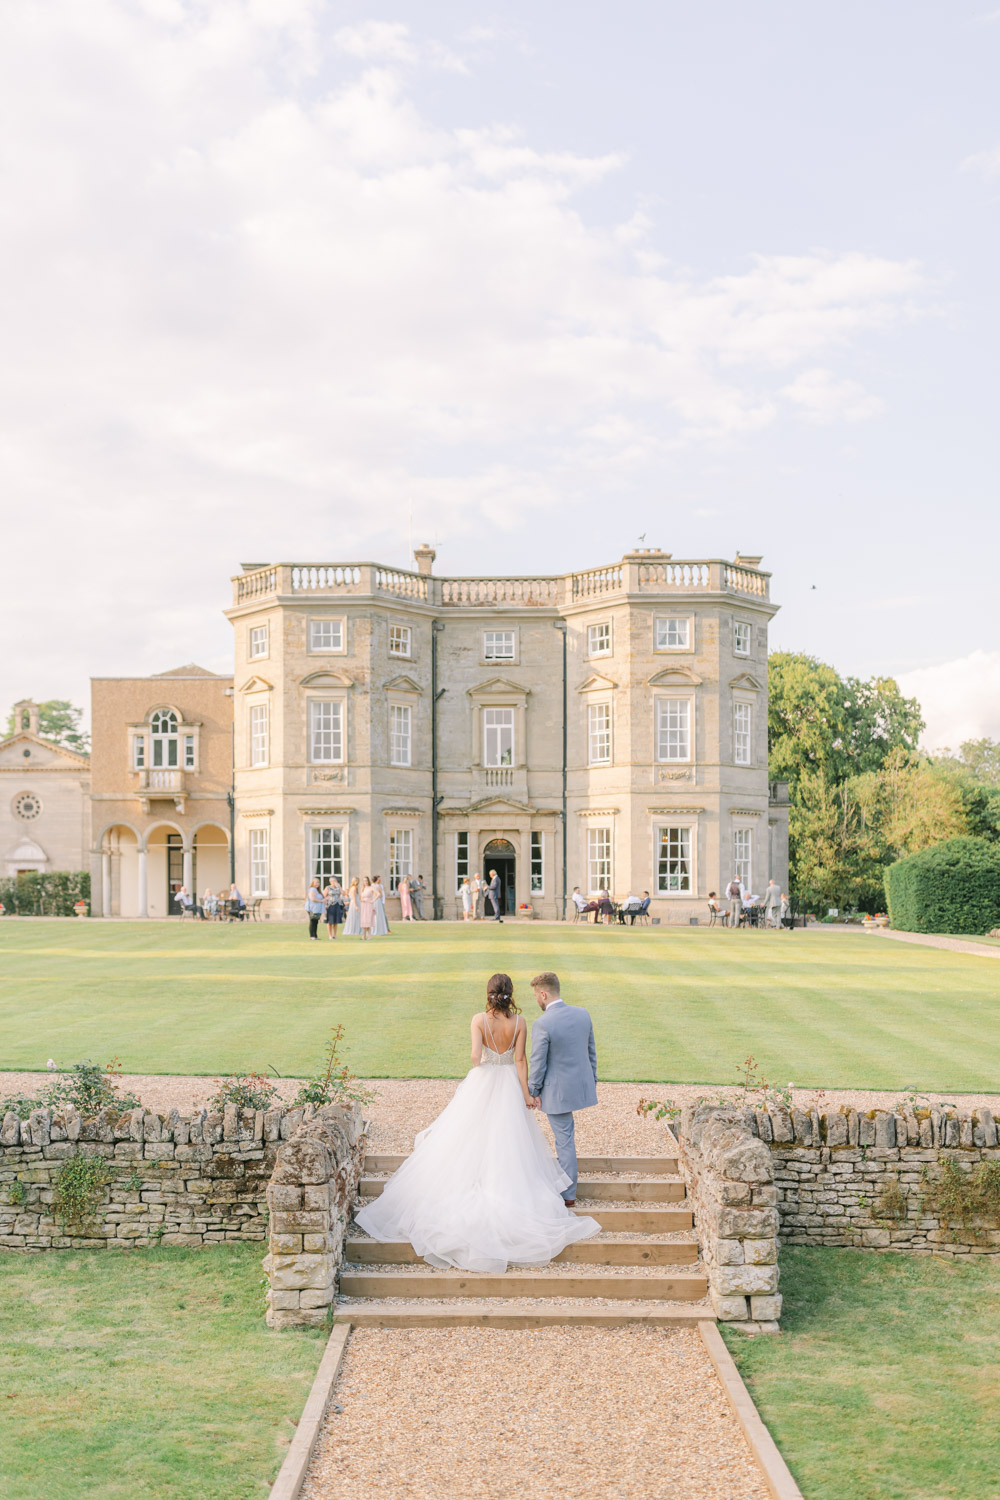 Bourton Hall Wedding venue on a summer day with bride and groom